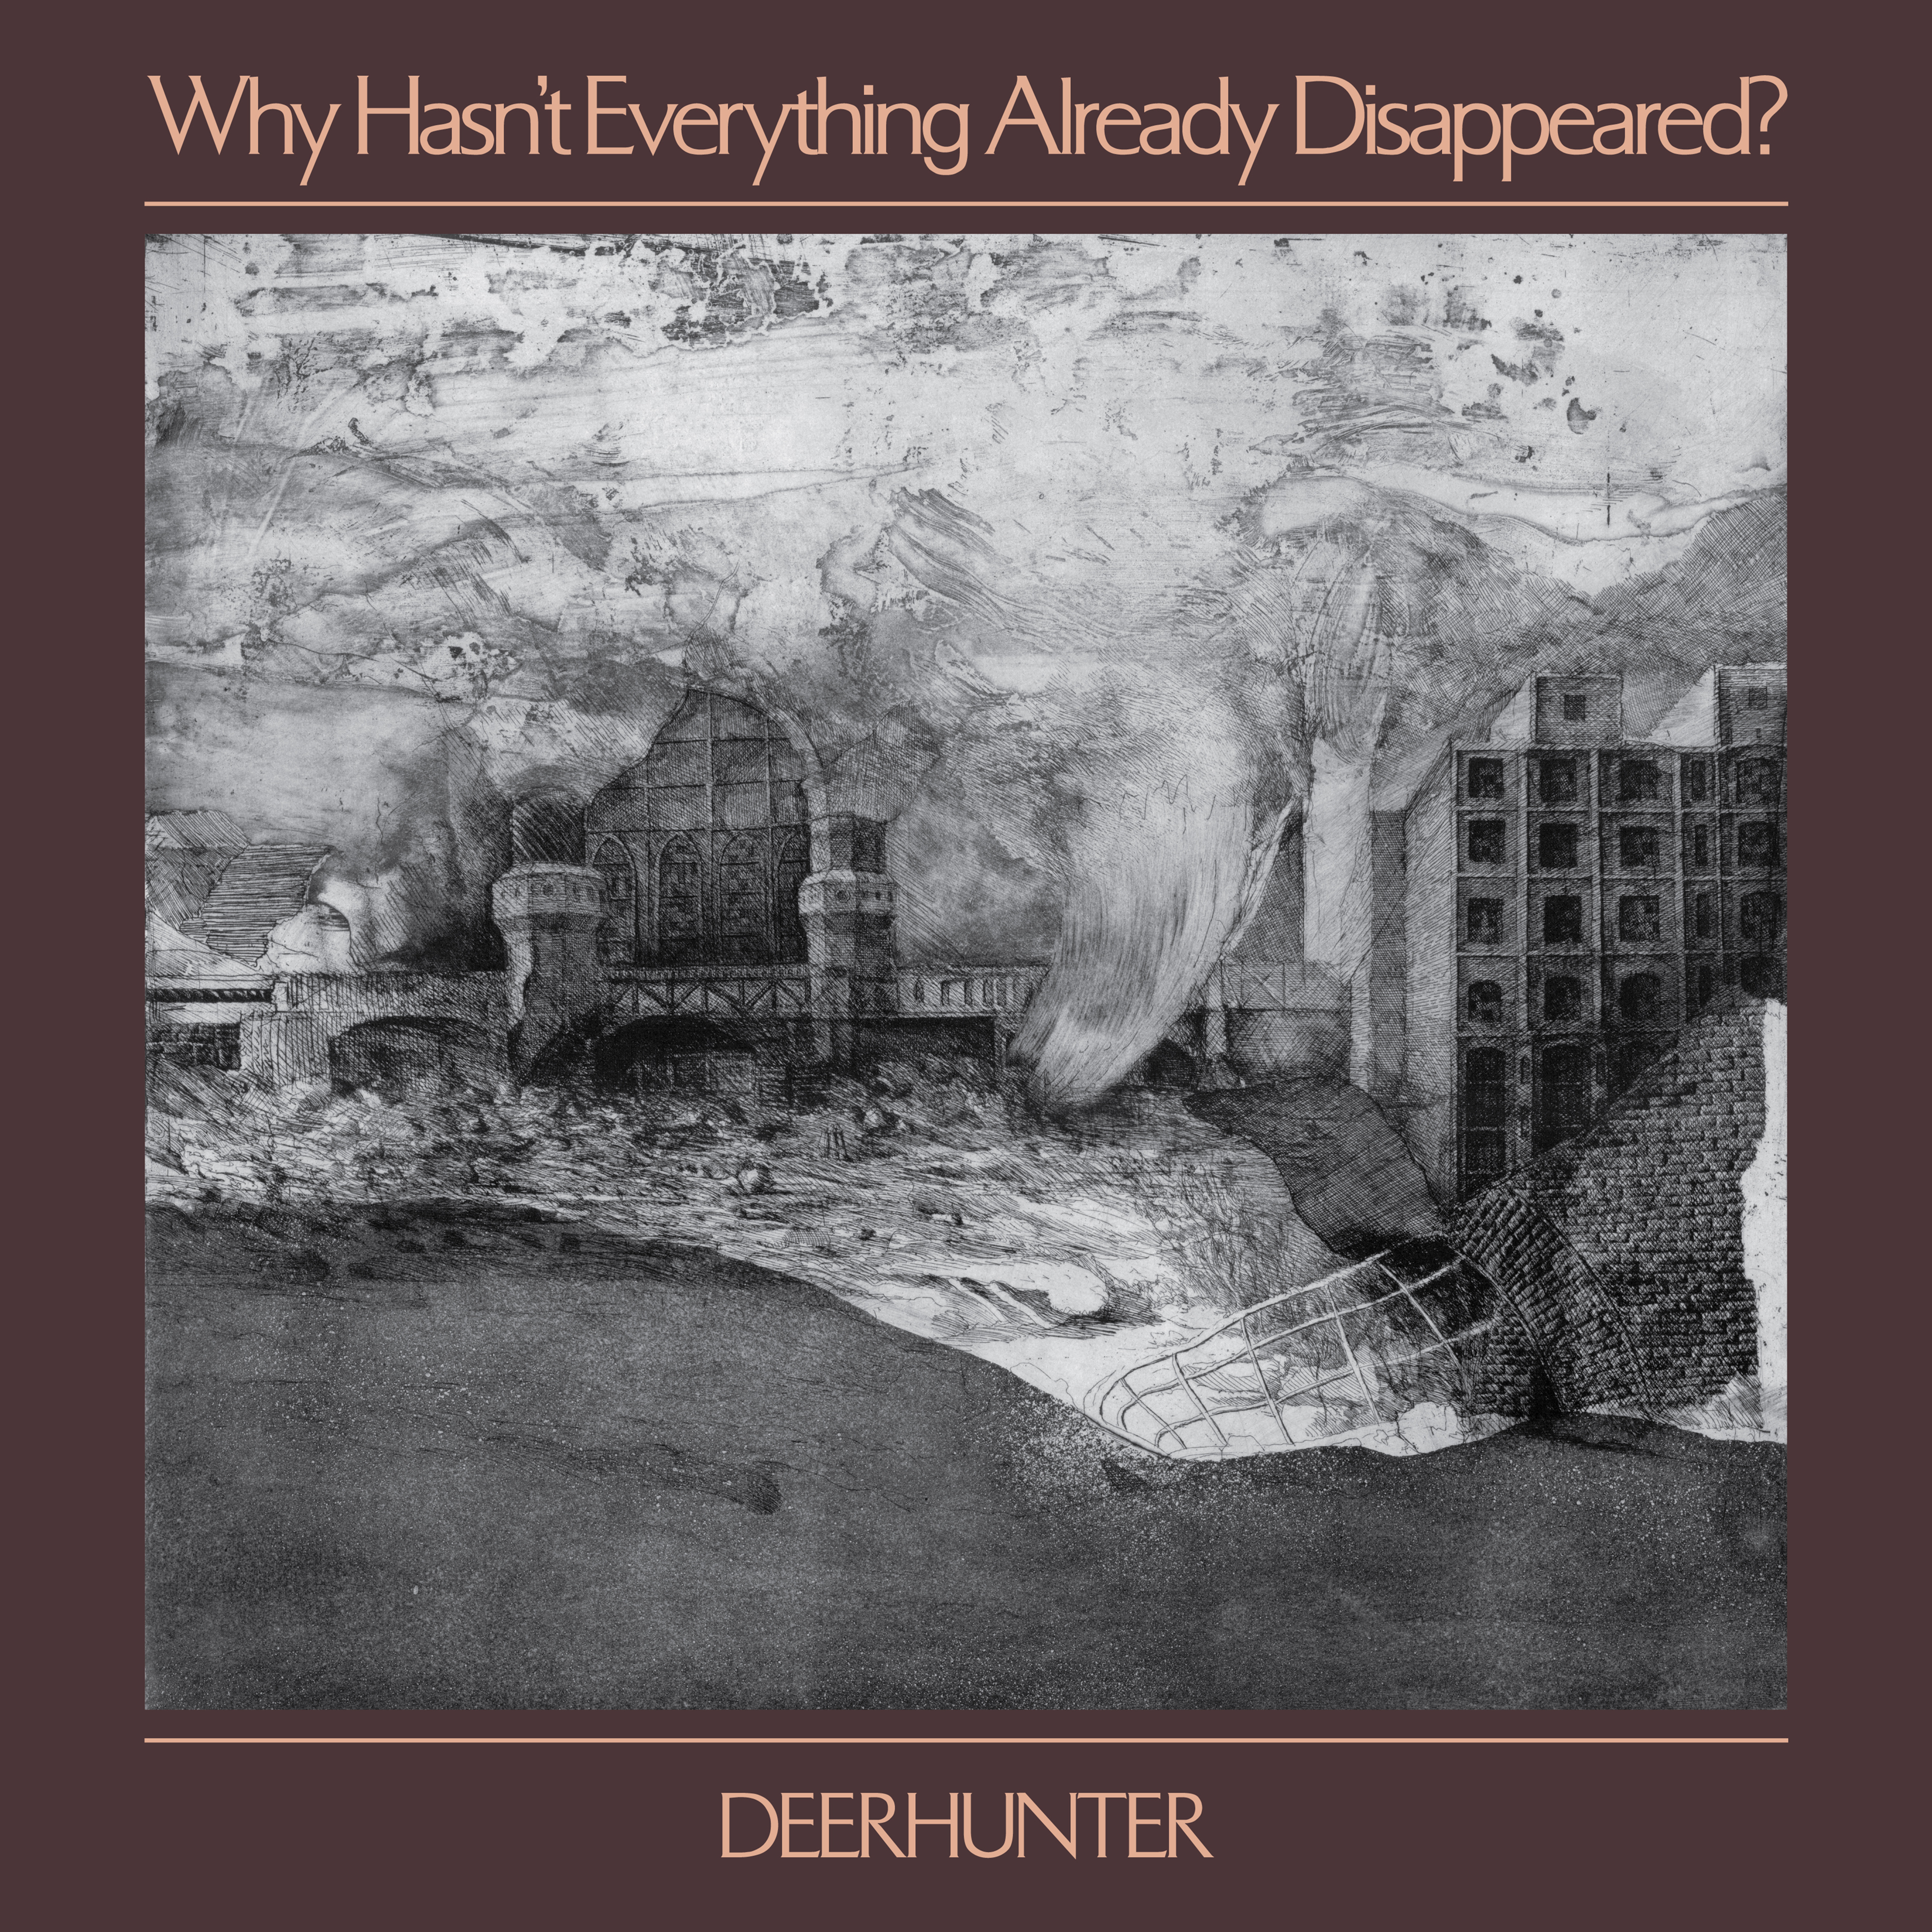 Deerhunter Announce New Album <i>Why Hasn’t Everything Already Disappeared?</i>, Release Video for “Death in Midsummer”” title=”Deerhunter” data-original-id=”308881″ data-adjusted-id=”308881″ class=”sm_size_full_width sm_alignment_center ” /></p>
<p>11/4 SAO PAOLO, Balaclava Festival<br />
11/8 SANTIAGO, Blondie<br />
11/10 SANTIAGO, Fauna Primavera<br />
11/11 BUENOS AIRES, Personal Fest<br />
11/13 QUITO, La Ideal<br />
11/14 LIMA, Sala Raimondi<br />
1/17 LOS ANGELES, CA Lodge Room (with Confusing Mix of Nations)<br />
1/21 OSAKA, Bigcat (with Gang Gang Dance)<br />
1/22 NAGOYA, Electric Ladyland<br />
1/23 TOKYO, O-East<br />
2/15 NASHVILLE, TN Cannery Ballroom (with Faye Webster)<br />
2/18 CLEVELAND, OH Mahall’s 20 Lanes (with Mary Lattimore)<br />
2/19 DETROIT, MI El Club (with Mary Lattimore)<br />
2/21 TORONTO, ON Danforth Music Hall (with Mary Lattimore)<br />
2/22 MONTREAL, QC Le National (with Mary Lattimore)<br />
2/23 NEW HAVEN, CT College Street Music Hall (with Mary Lattimore)<br />
2/24 BOSTON, MA Royale (with Mary Lattimore)<br />
2/27 BROOKLYN, NY Brooklyn Steel (with Mary Lattimore, L’Rain)<br />
3/1 PHILADELPHIA, PA Union Transfer (with L’Rain)<br />
3/2 WASHINGTON DC 9:30 Club (with L’Rain)<br />
3/3 BALTIMORE, MD Ottobar<br />
3/5 PITTSBURGH, PA Mr. Small’s Theatre (with L’Rain)<br />
3/6 LOUISVILLE, KY Headliner’s Music Hall (with L’Rain)<br />
3/8 SAVANNAH, GA Savannah Stopover Music Festival</p>
</p></p>  </div>
  <div class=